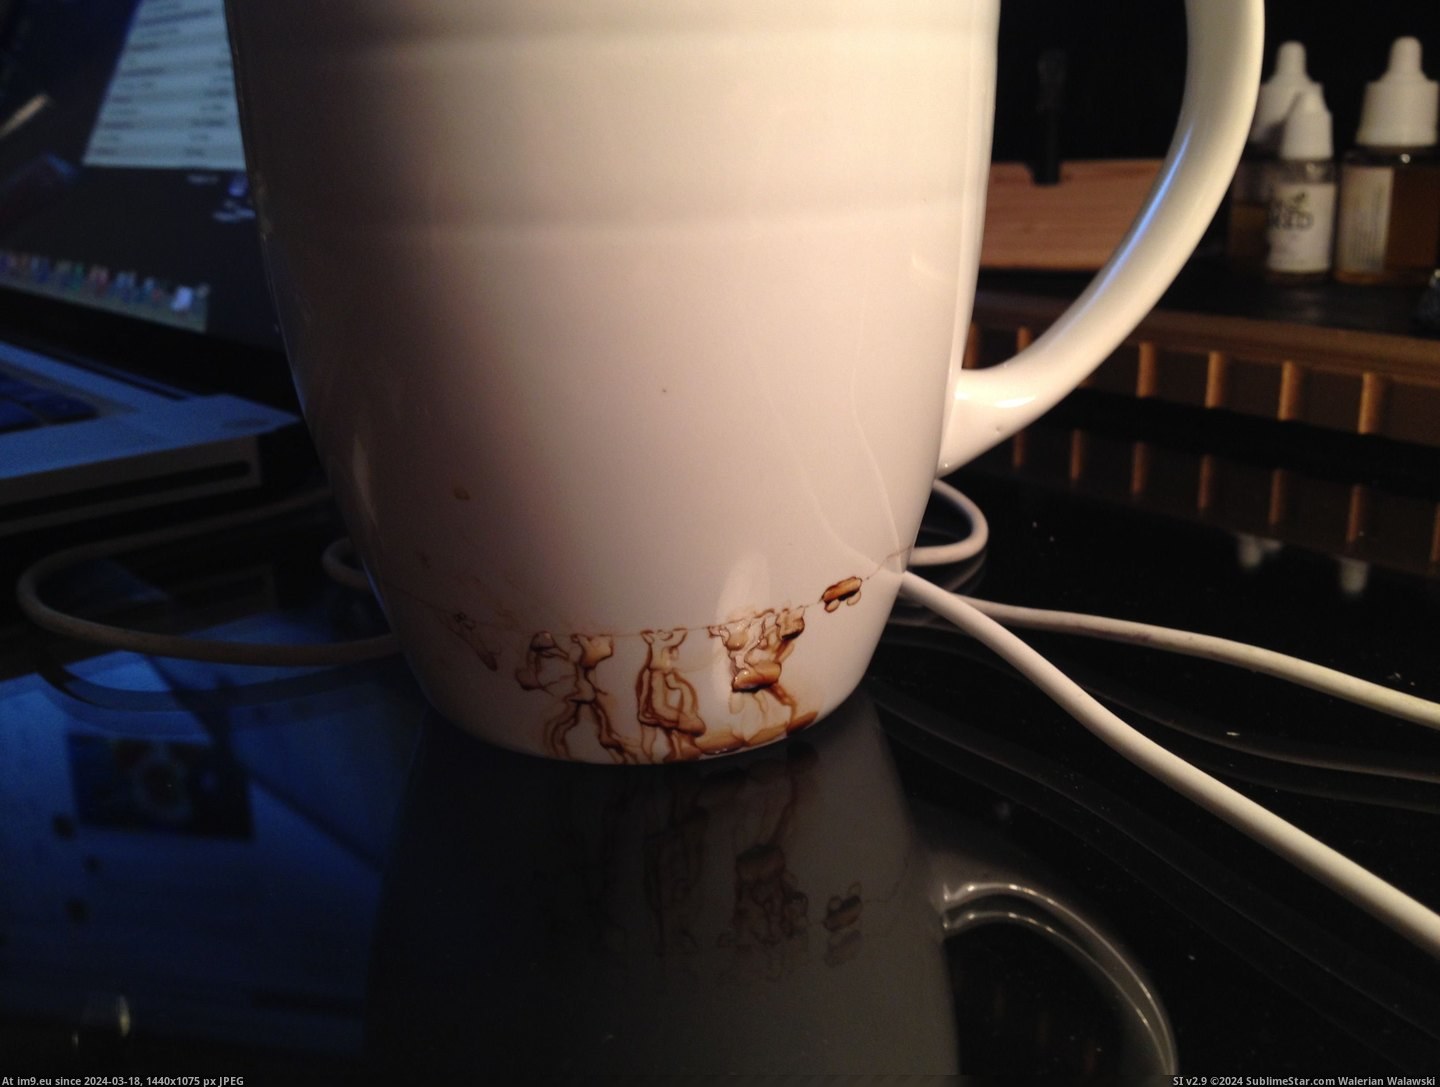 #Tiny #Coffee #Crack #Mug #Hour #Realize [Mildlyinteresting] Didn't realize my coffee mug had a tiny crack in it for about an hour. Pic. (Bild von album My r/MILDLYINTERESTING favs))